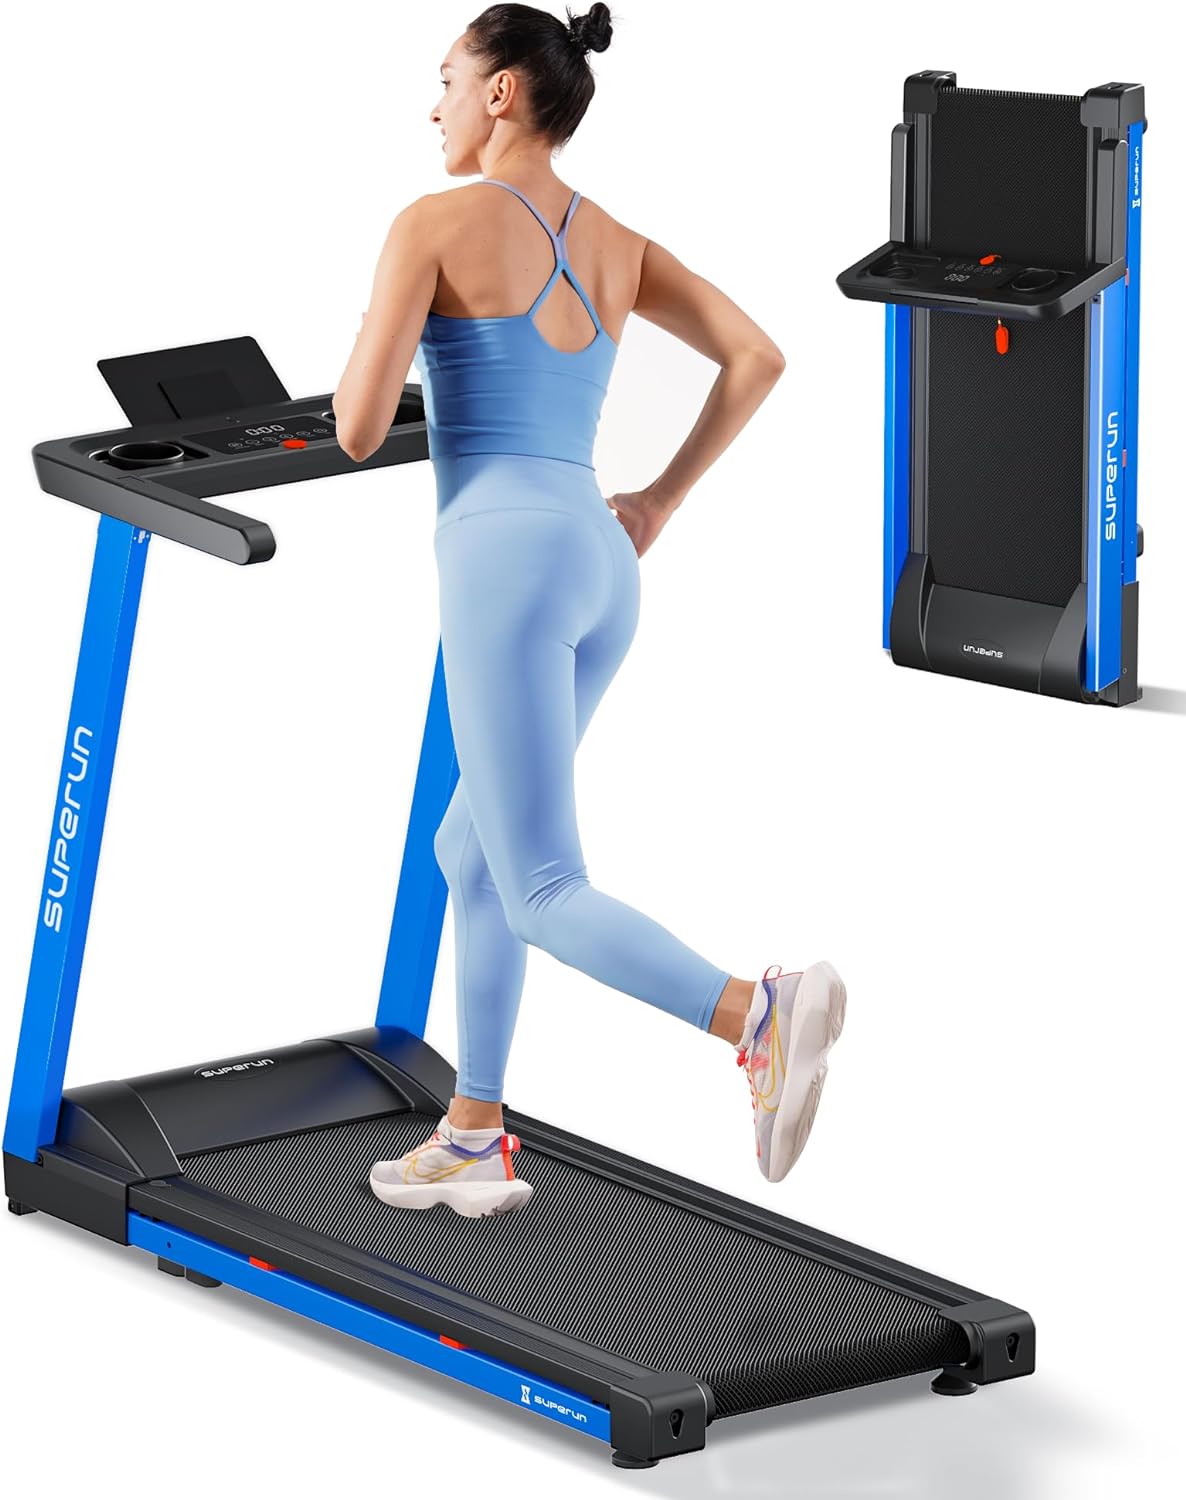 Superun Folding Treadmills for Home, 3.0HP Foldable Treadmill for Small Space, Portable Compact Treadmill, 12 Programs Built into Pitpat